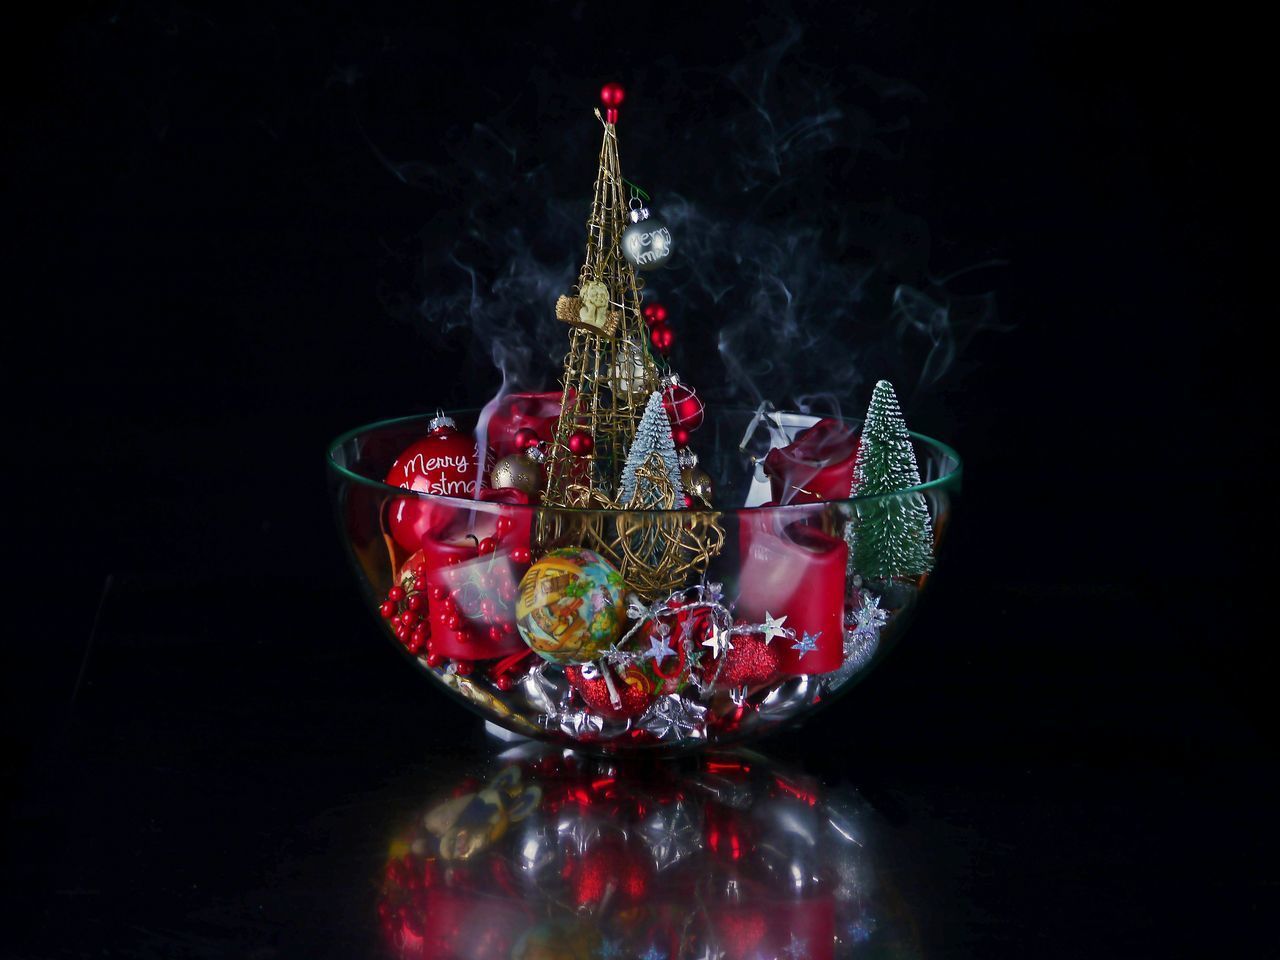 CLOSE-UP OF CHRISTMAS DECORATION ON GLASS TABLE